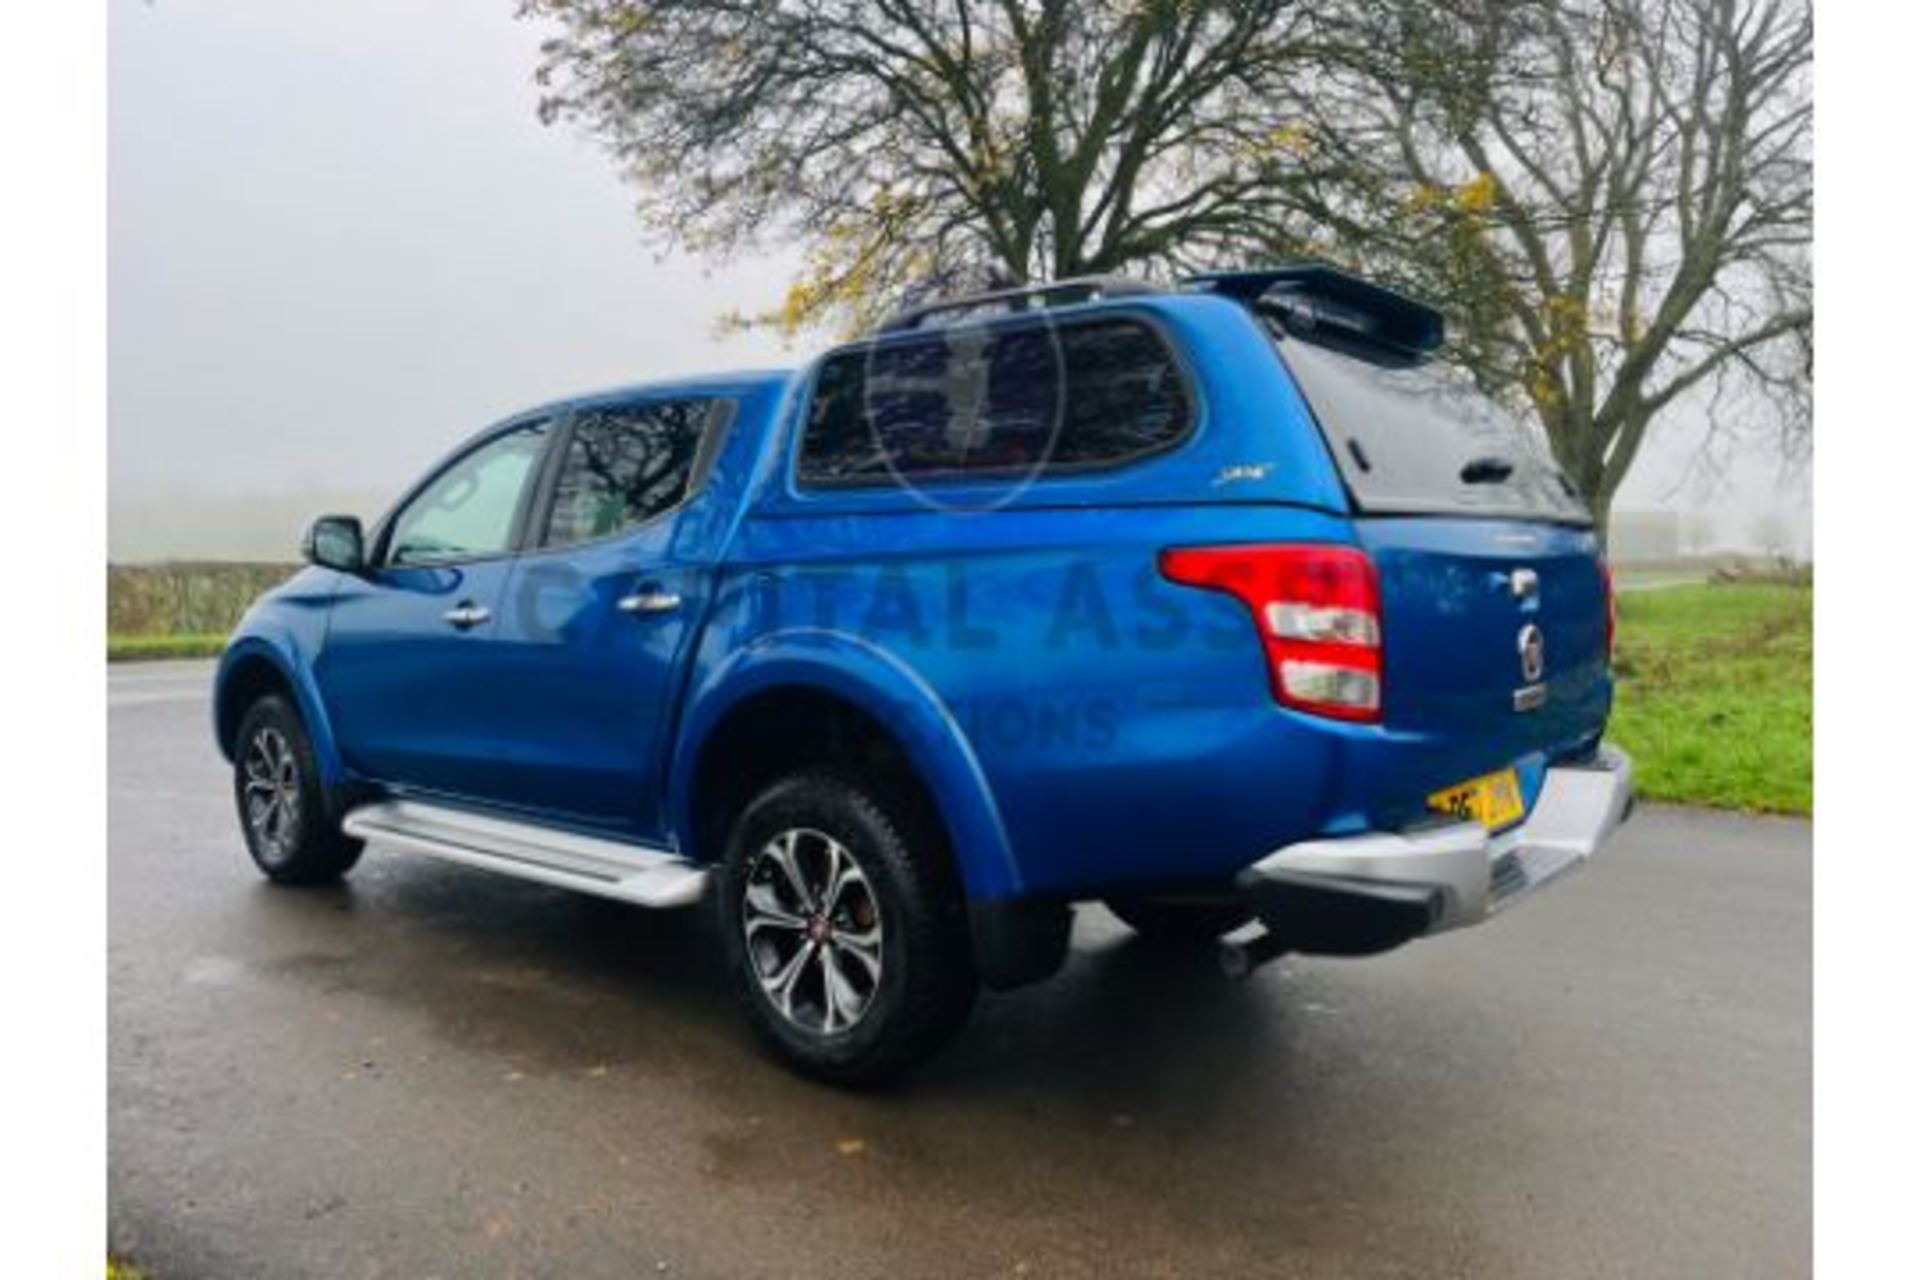 (ON SALE) FIAT FULLBACK 2.4DI-D "AUTOMATIC" LX D/CAB 4X4 PICK UP - 2018 REG - 1 OWNER - LEATHER - - Image 11 of 32